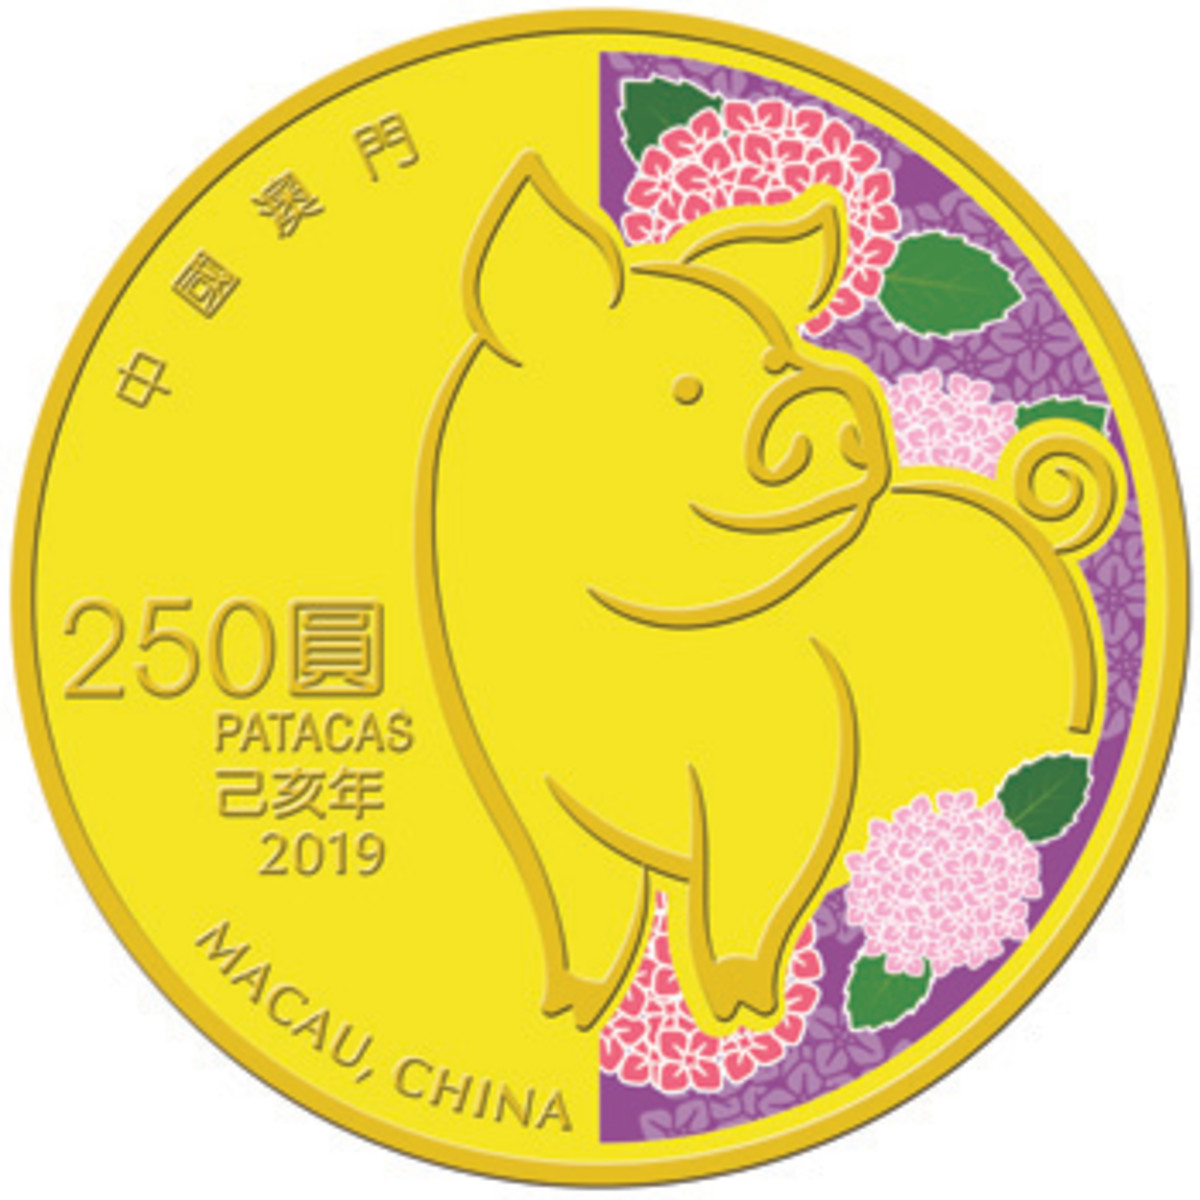  Common reverse of Macau’s colorized YoP coins as shown by the gold 250 patacas. (Image courtesy Singapore Mint)